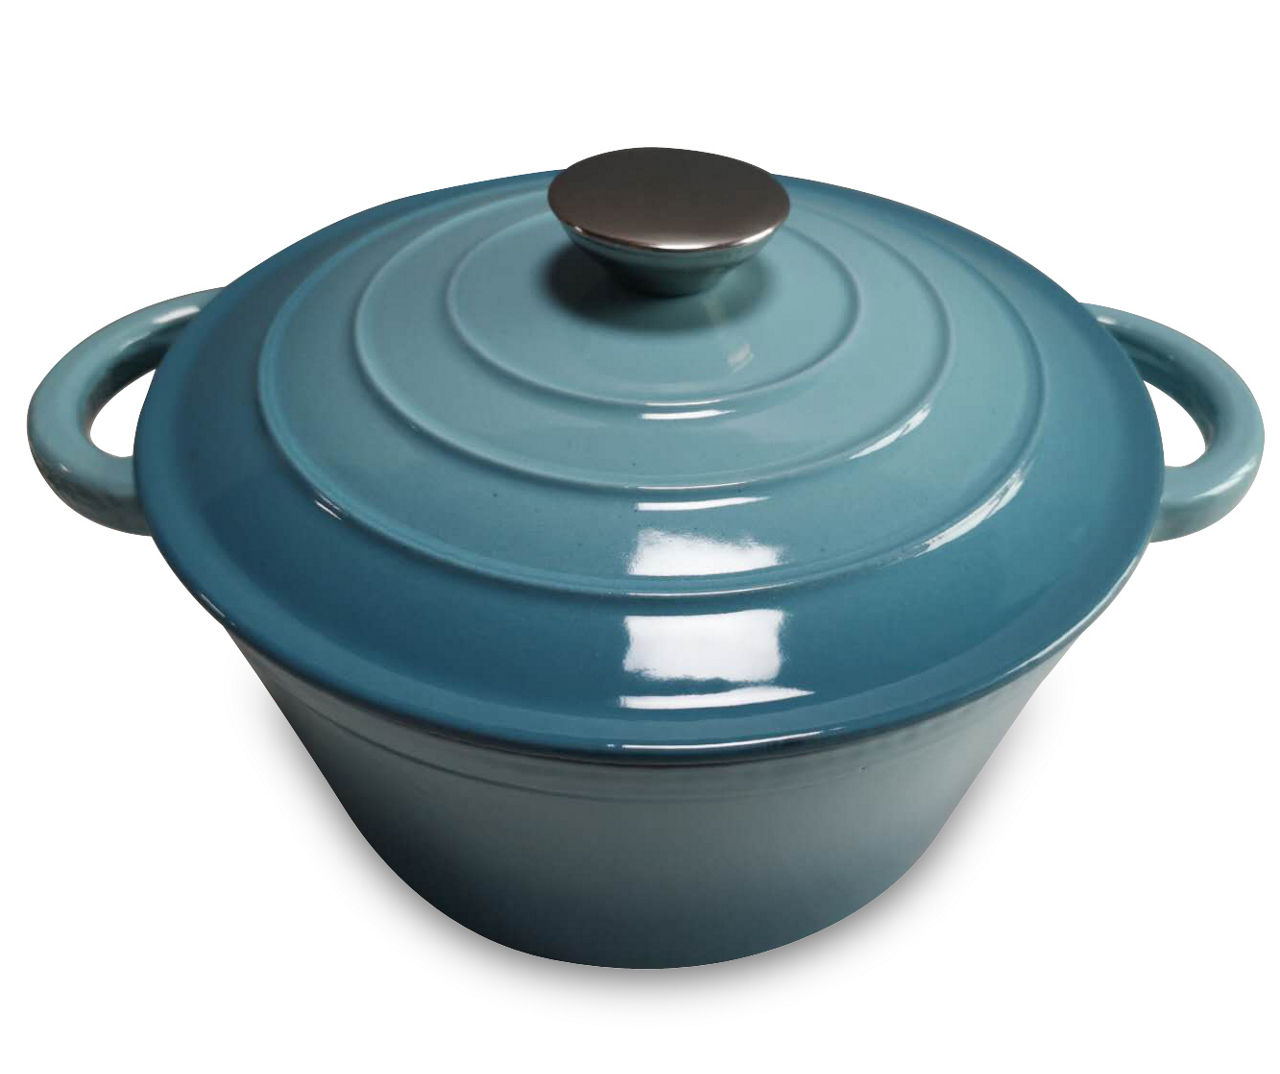 A too-small dutch oven